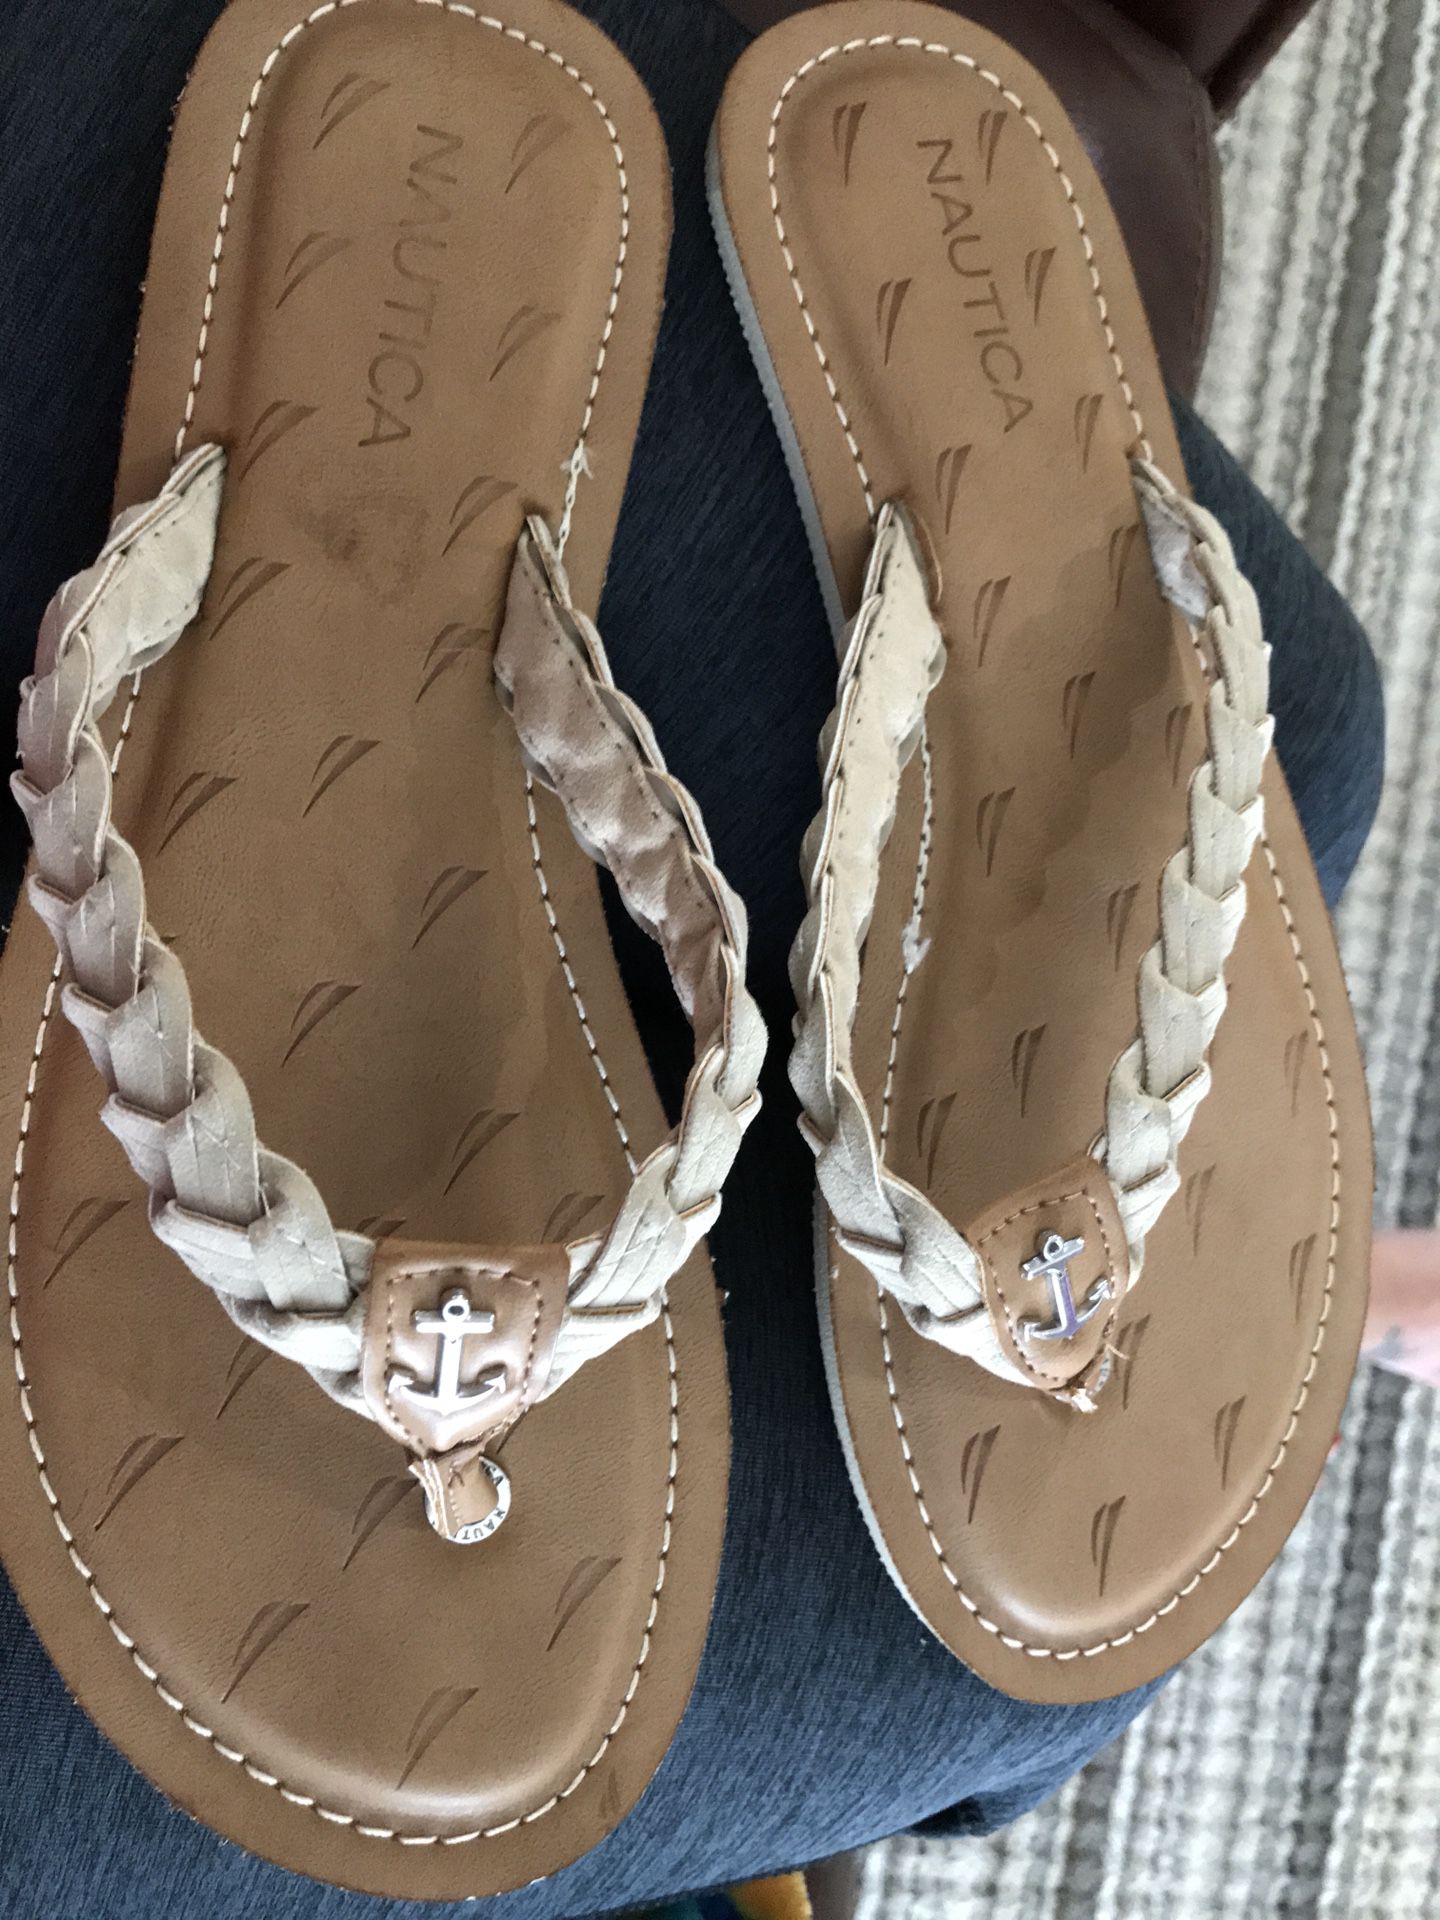 Nautica Anchor Sandals Flip Flop All Leather for Sale in Louisville, KY -  OfferUp